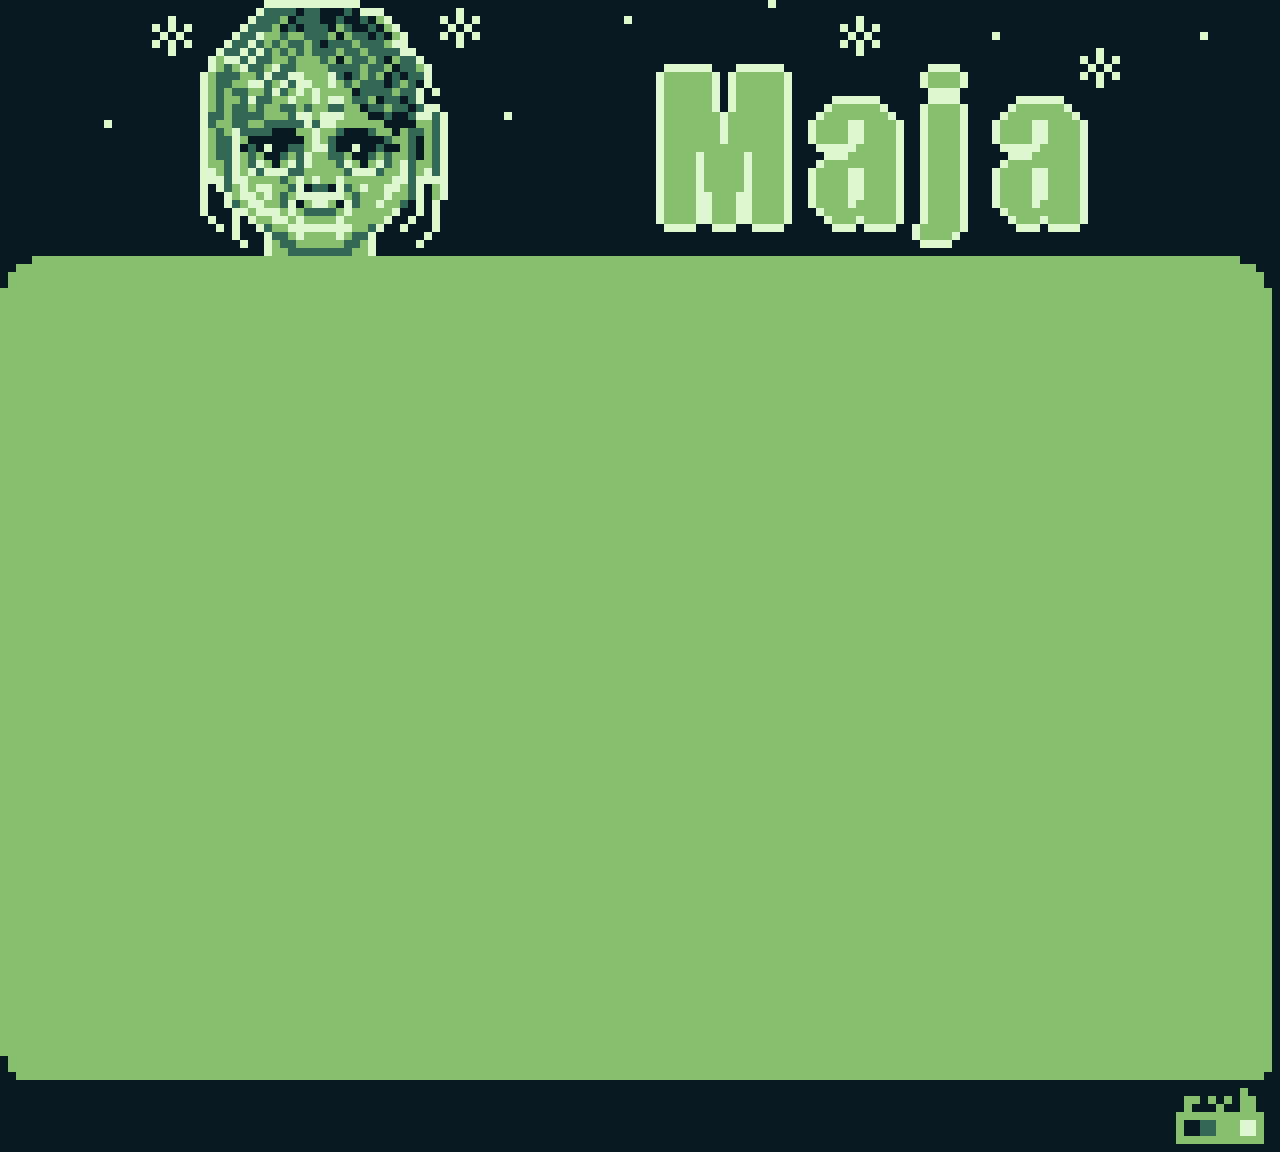 pixel art Game Boy screen with a frame, containing a portrait of a girl, her name and some stars